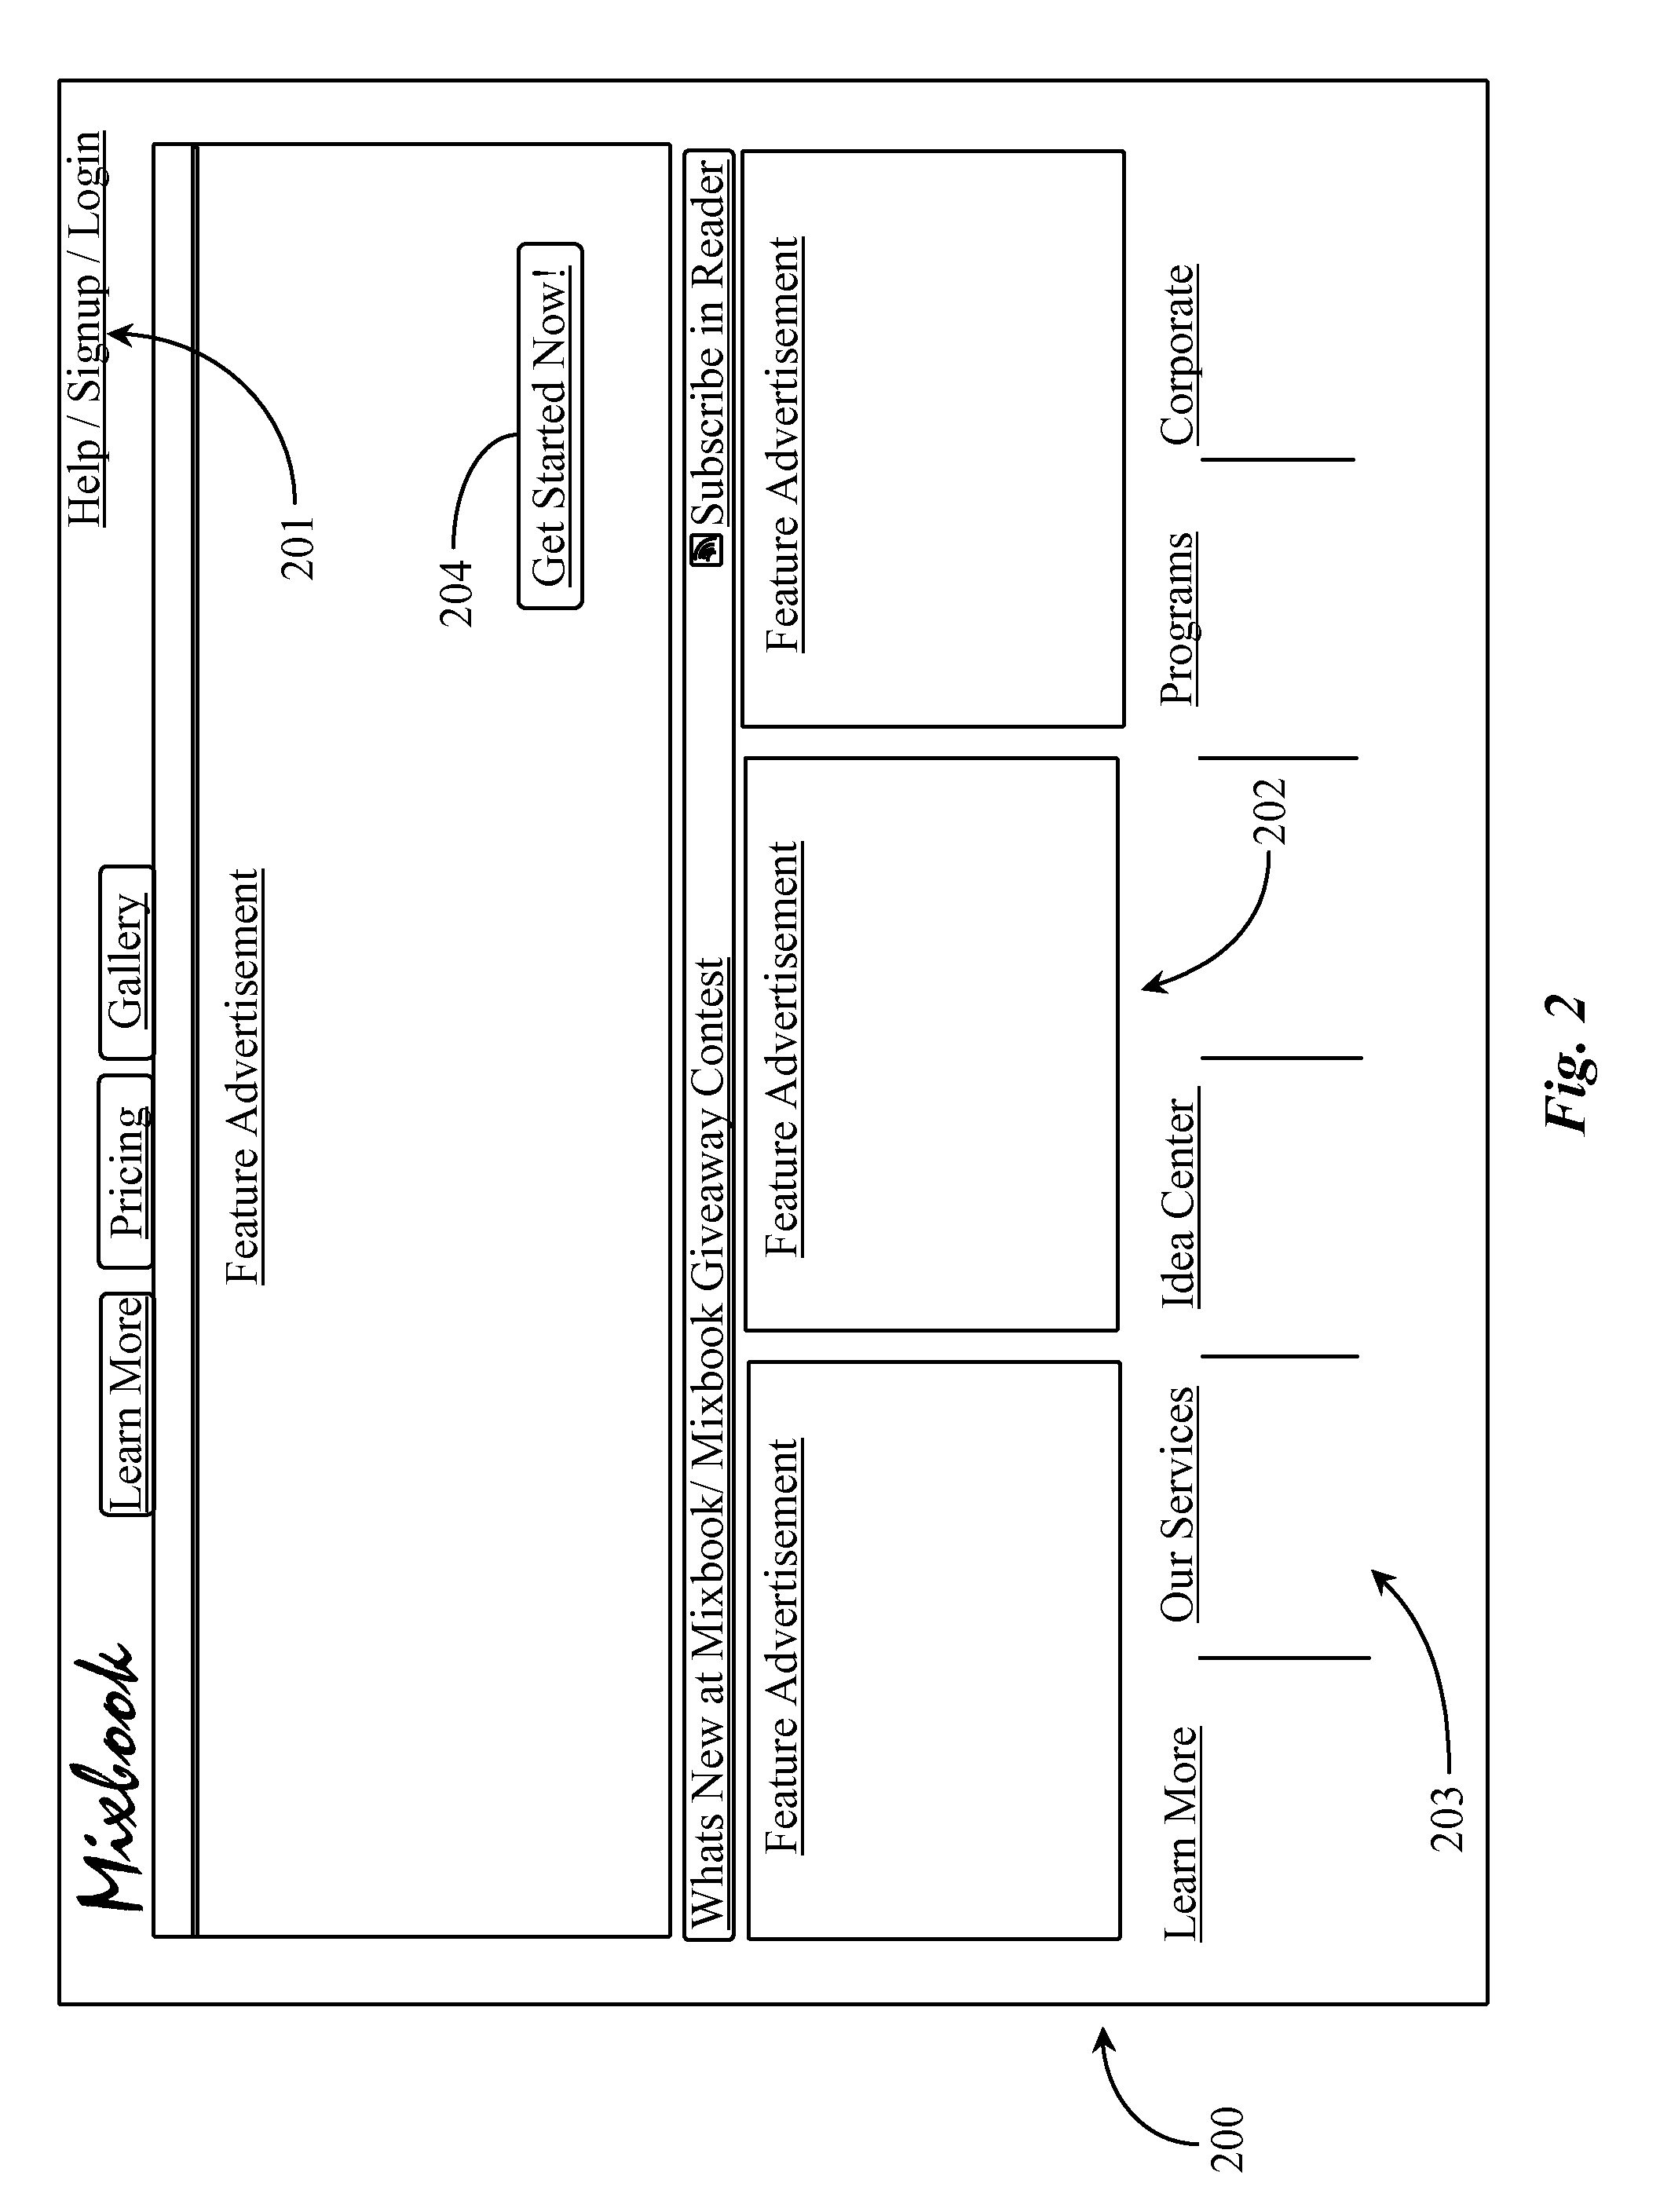 Method for Automatically Previewing Edits to Text Items within an Online Collage-Based Editor